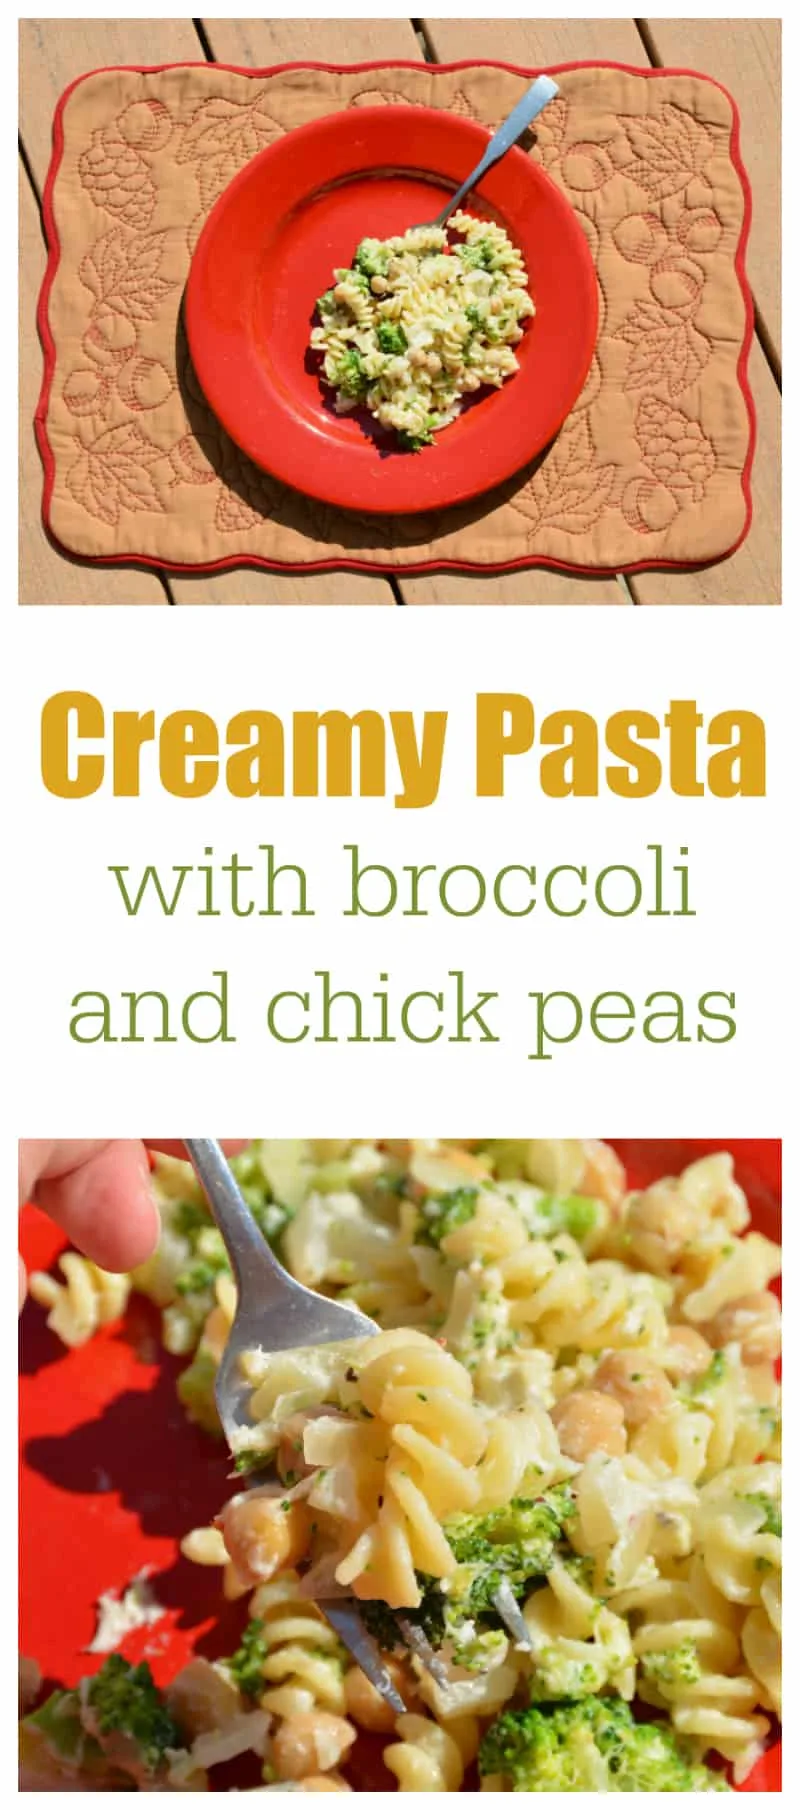 creamy-pasta-with-broccoli-and-chick-peas